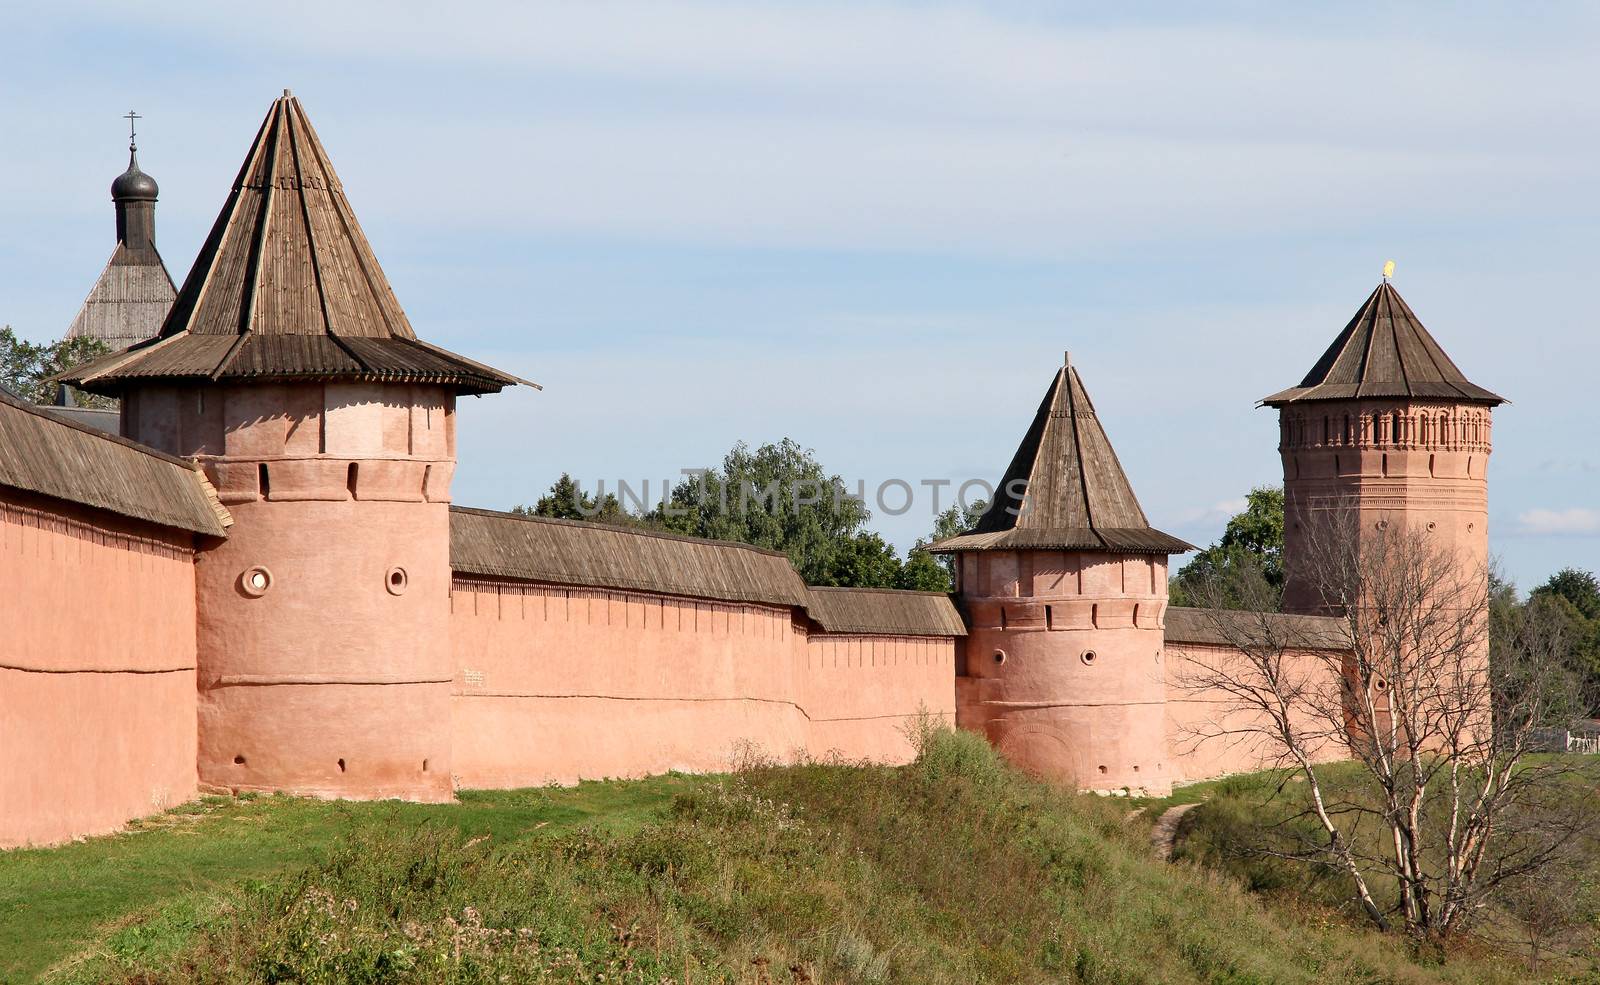 Wall of Monastery of Saint Euthymius in Suzdal, Russia